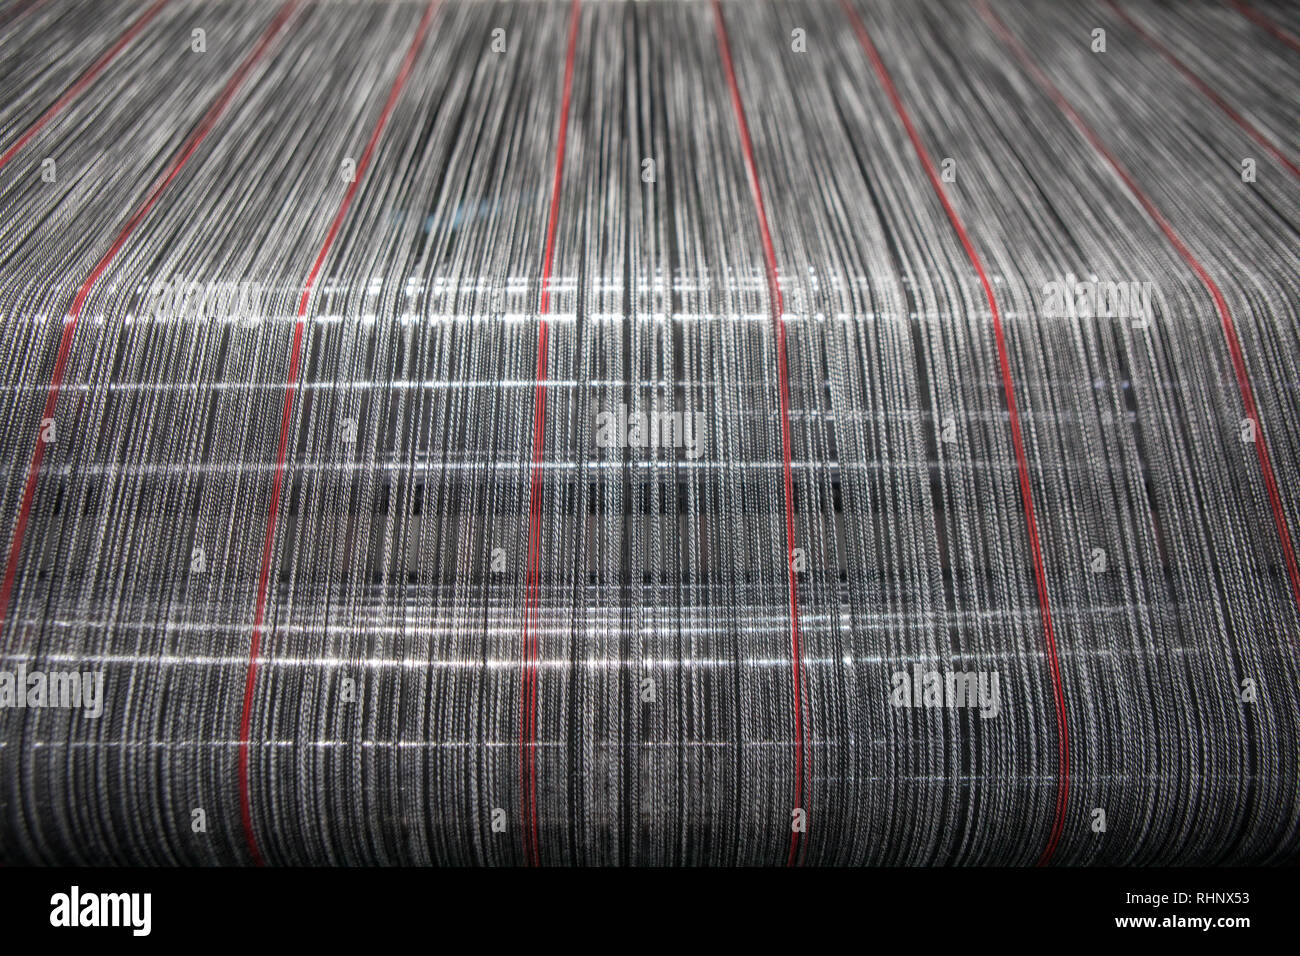 Yarn thread lines on the weaving loom machine. A loom machine for clothing or woven label in textile factory. Weaving machine for garment industry. Stock Photo